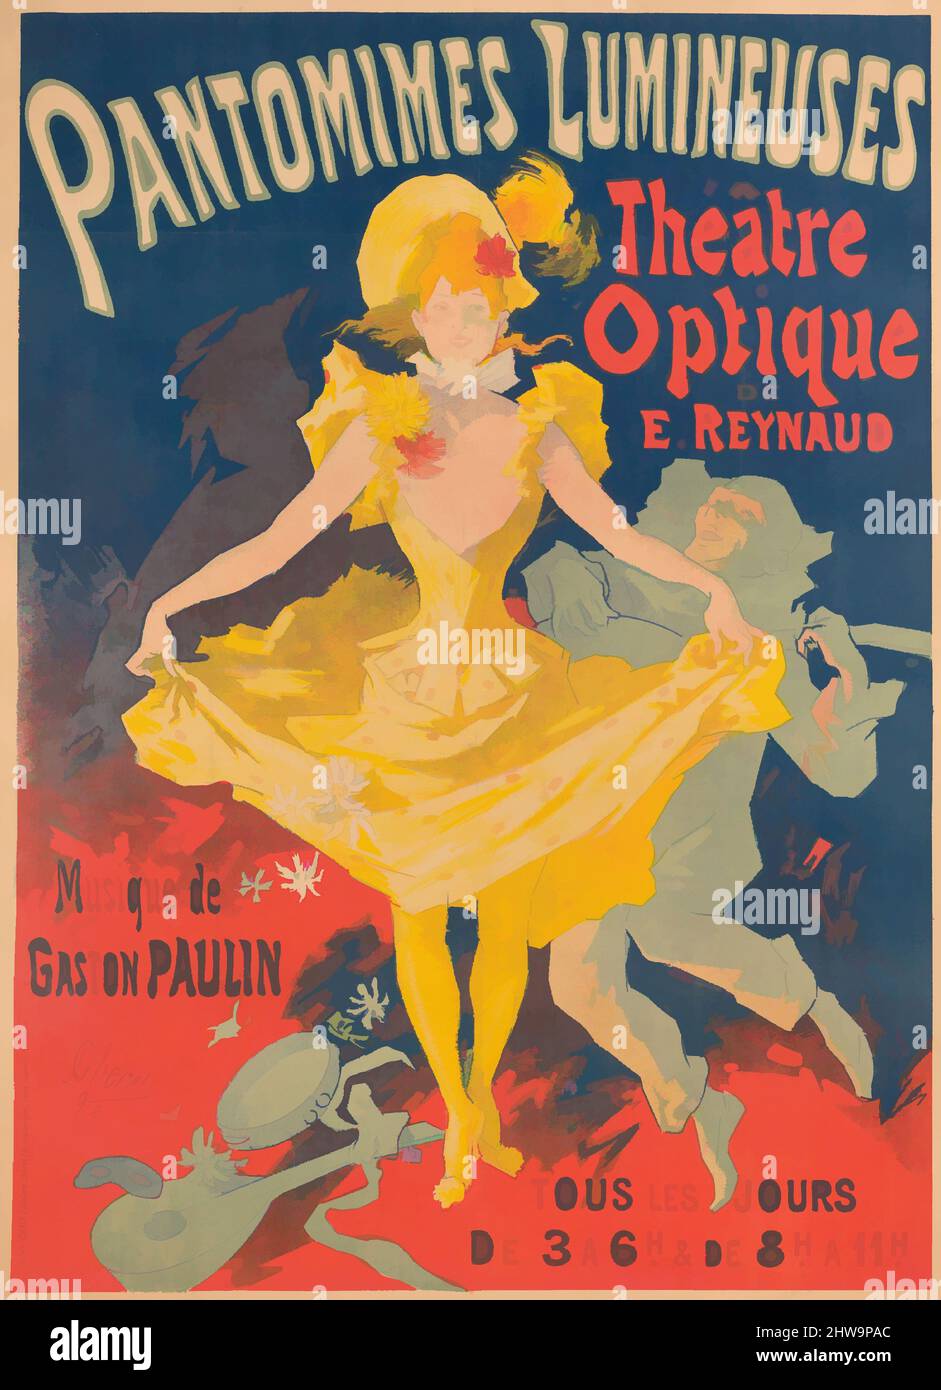 Art inspired by Drawings and Prints, Poster, Musée Grévin, Pantomimes Lumineuses, Théâtre optique de E. Reynaud, musique de Gaston Paulin, Classic works modernized by Artotop with a splash of modernity. Shapes, color and value, eye-catching visual impact on art. Emotions through freedom of artworks in a contemporary way. A timeless message pursuing a wildly creative new direction. Artists turning to the digital medium and creating the Artotop NFT Stock Photo